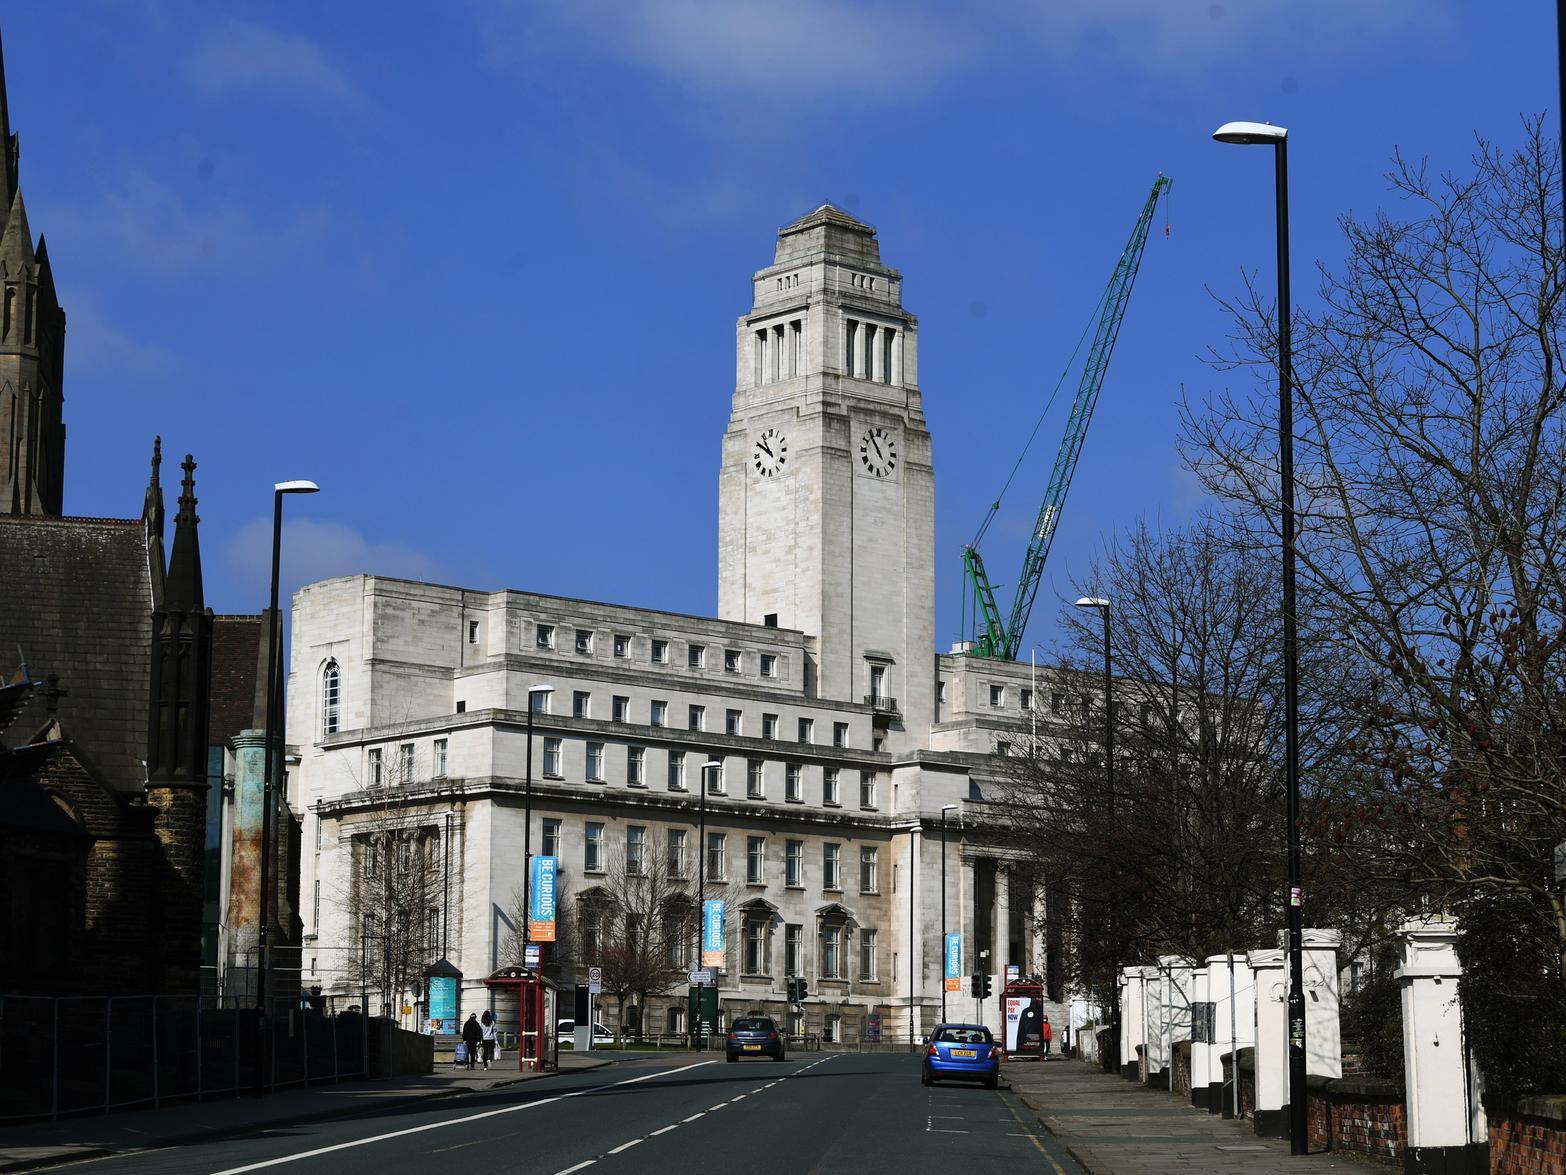 University of Leeds ranked as one of the top universities in the world ...